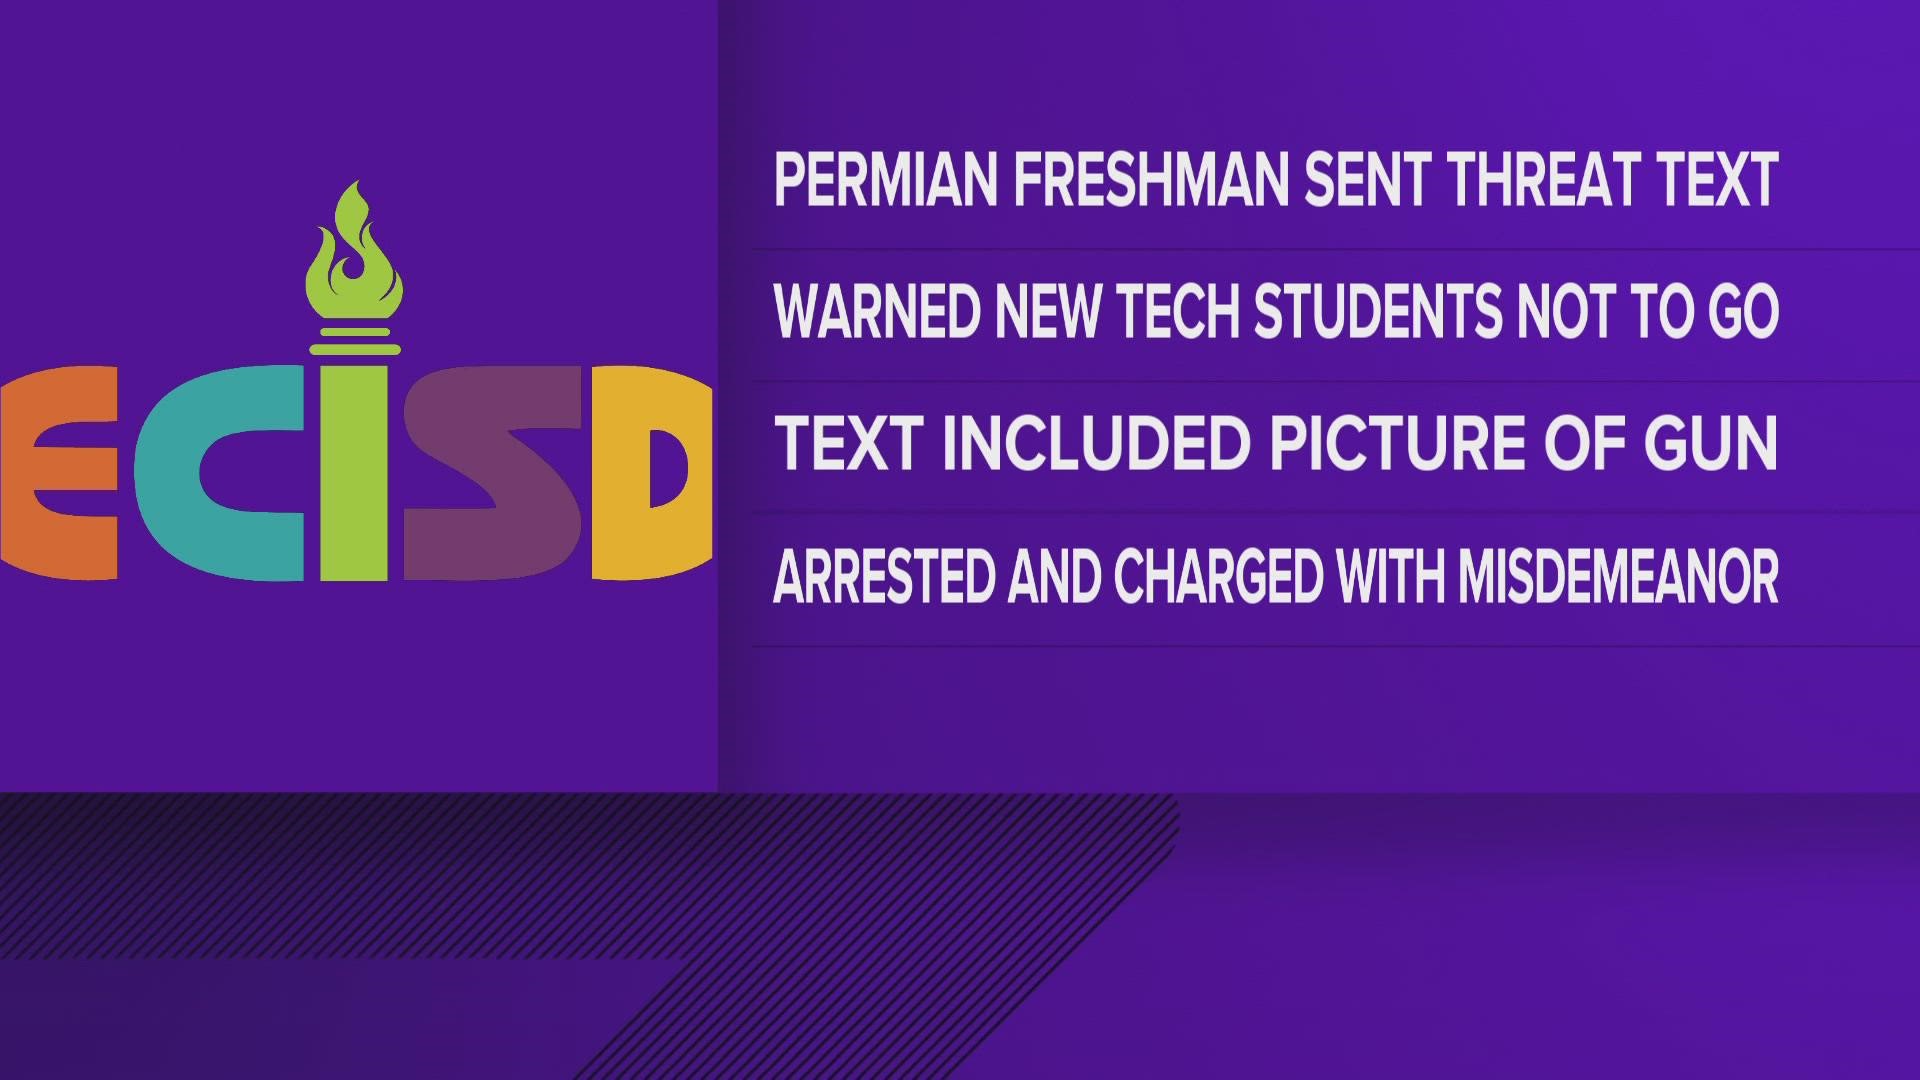 ECISD says the student told two New Tech Odessa students not to attend school Monday.